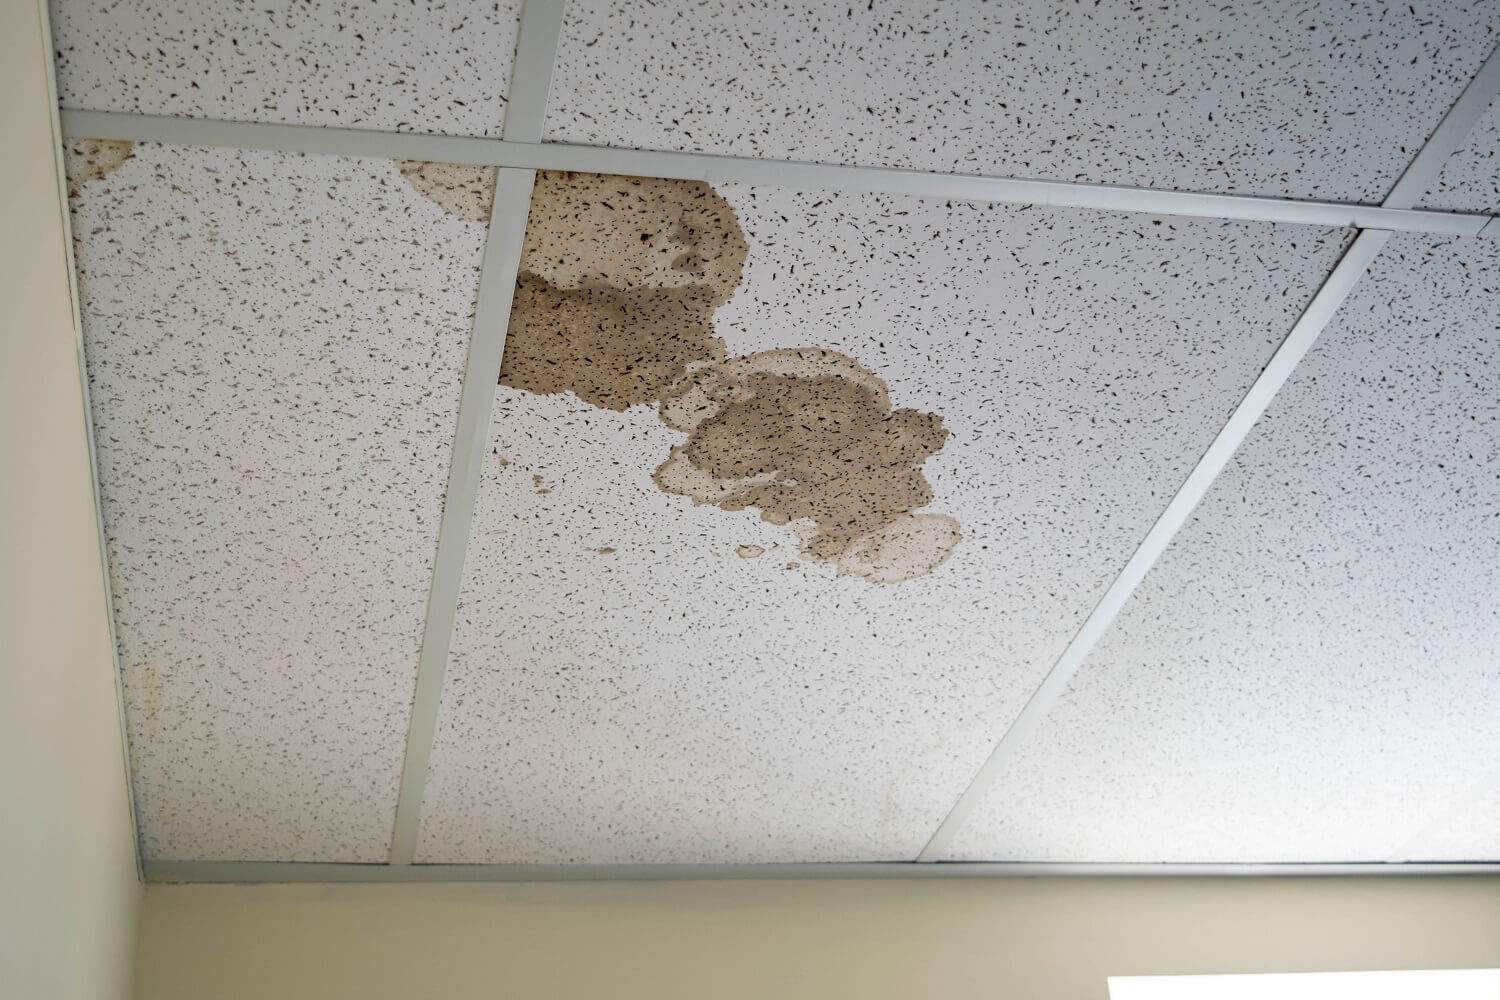 How to Fix Brown Spots on Ceiling with No Leak